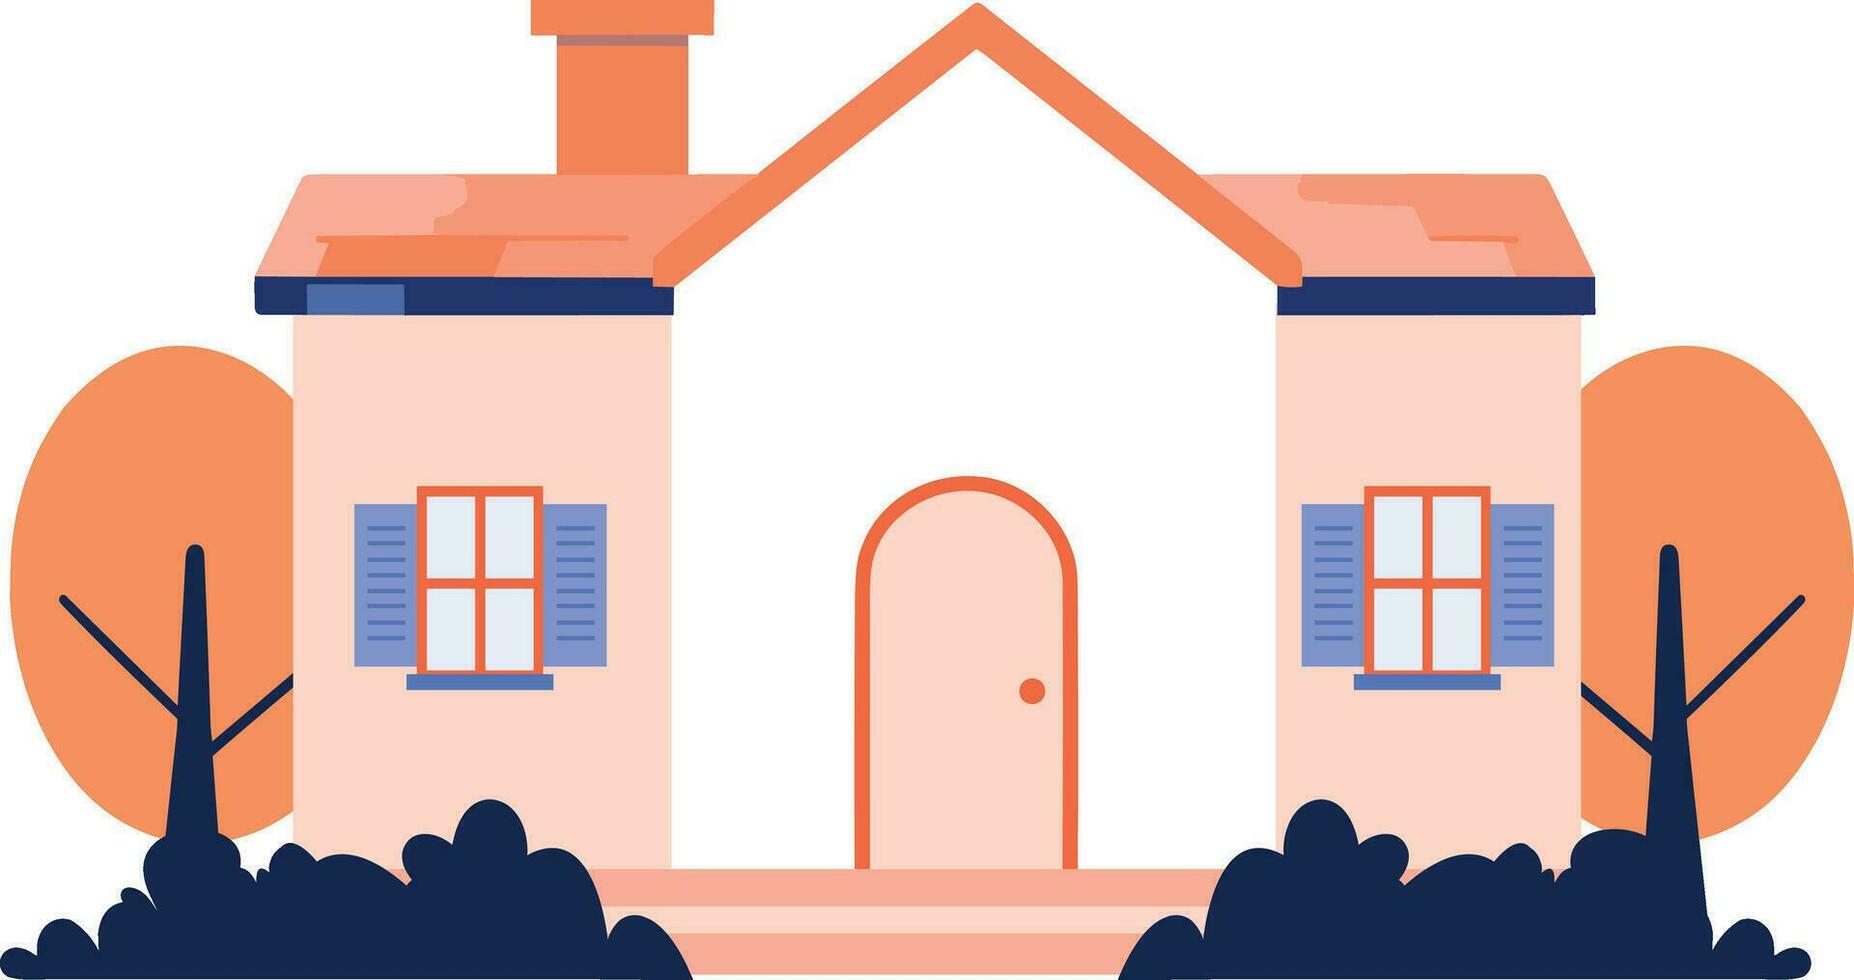 Hand Drawn House building in vintage style in flat style vector